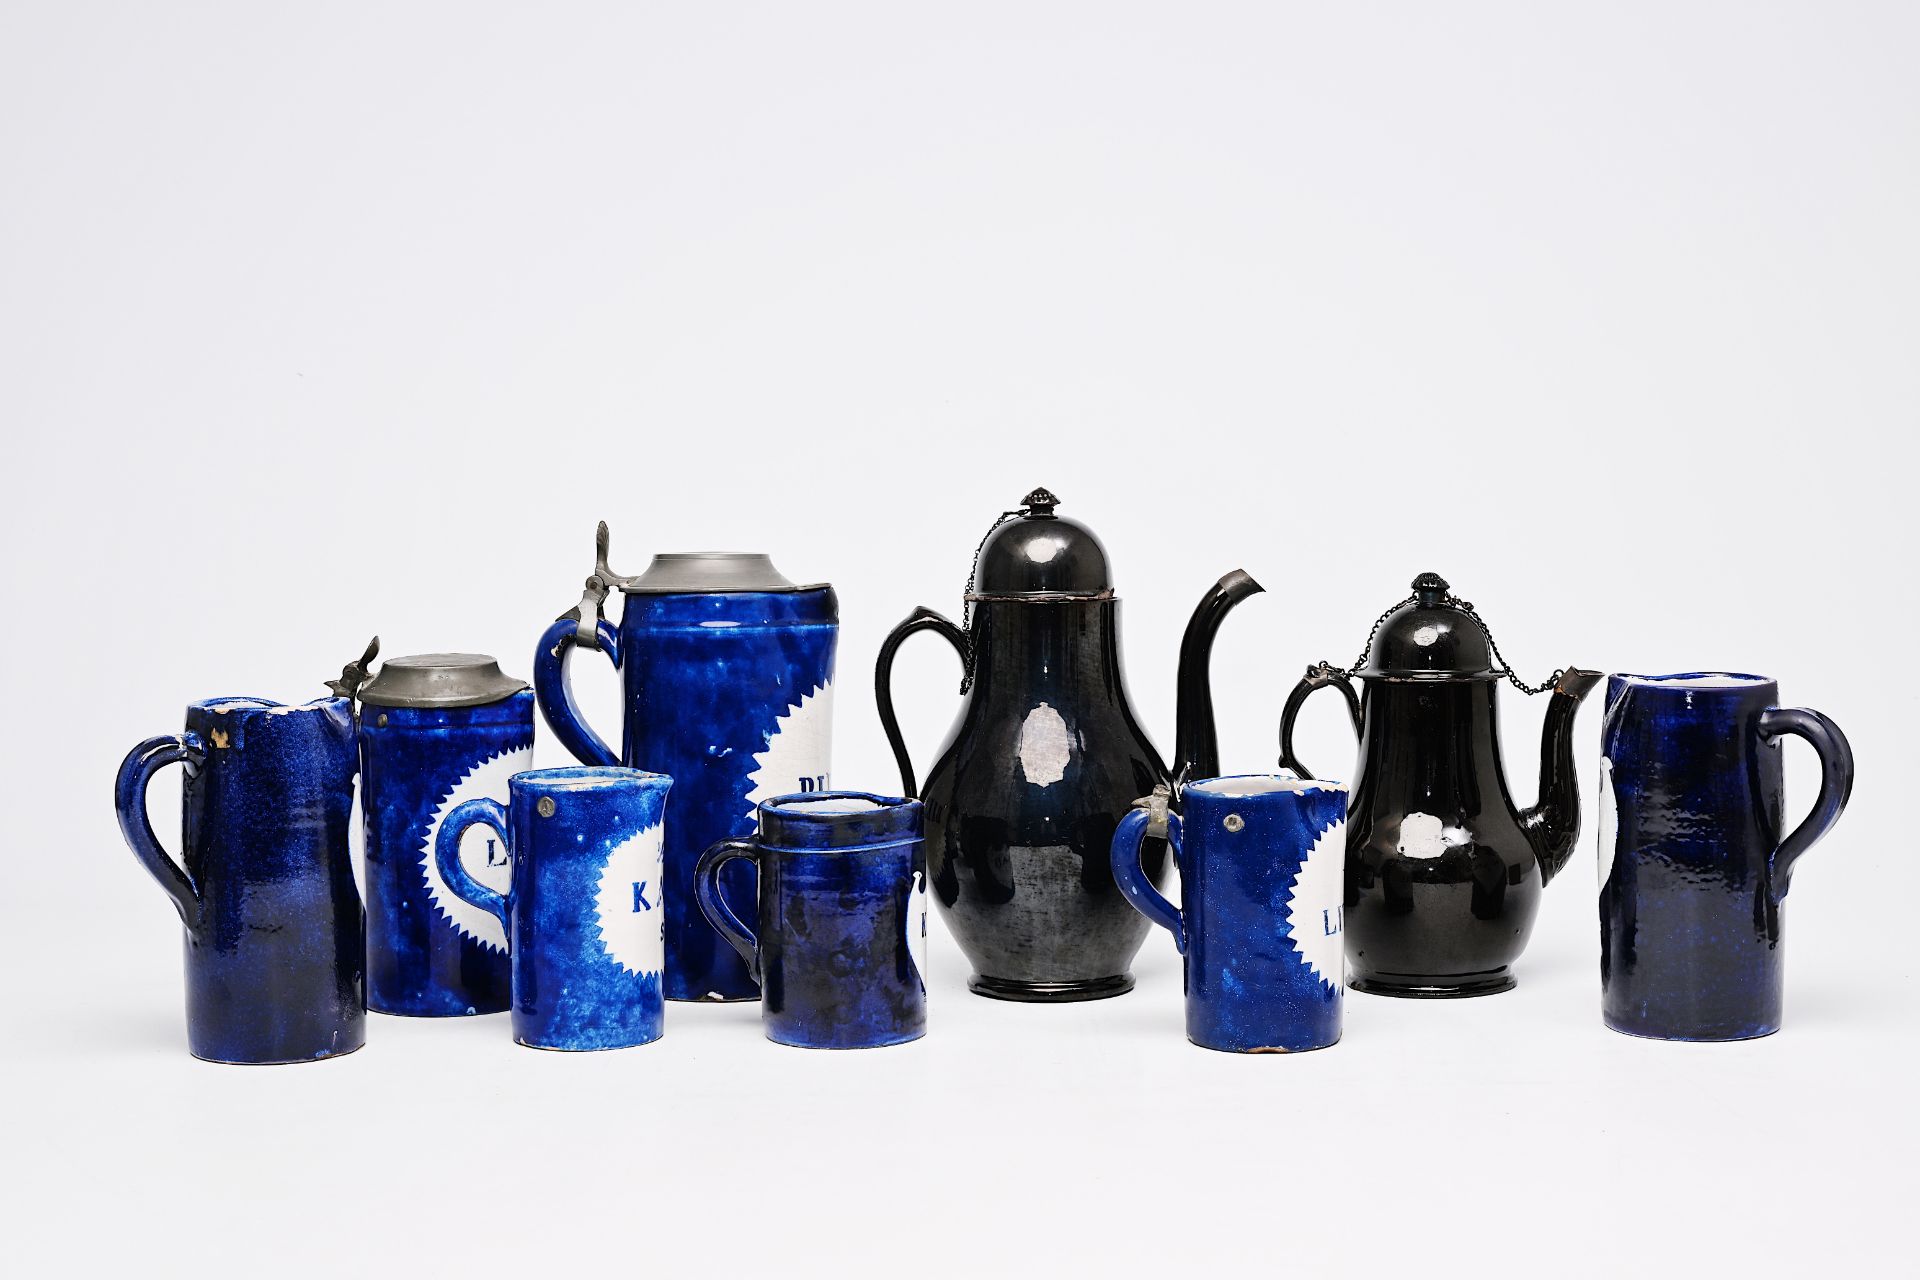 Seven blue and white Brussels faience beer mugs and two black-glazed Namur pottery ewers, 18th/19th